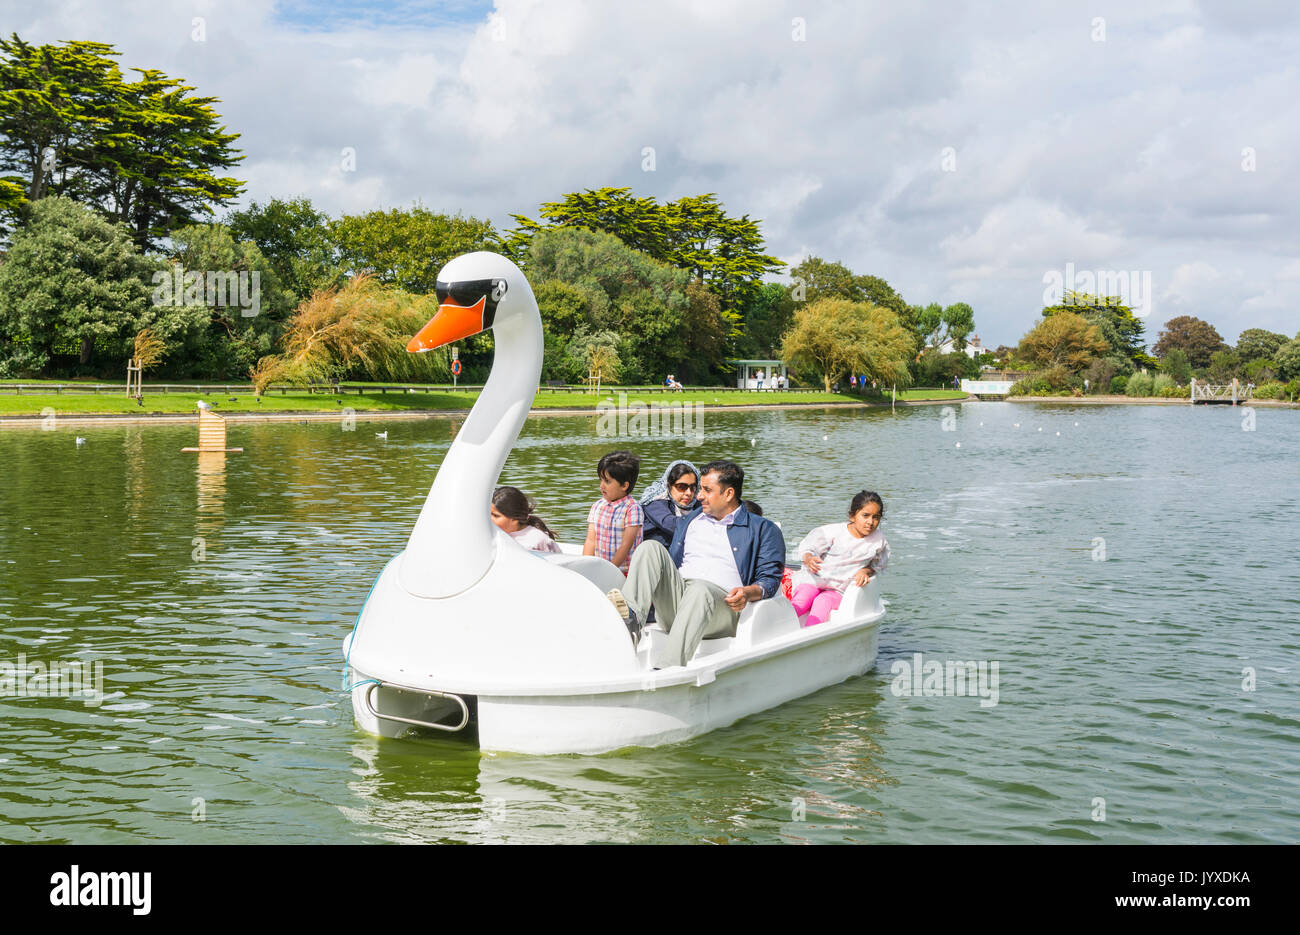 Mewsbrook Park, Littlehampton, West Sussex, England, UK. Sunday 20th August 2017. UK Weather. A family enjoy riding on a pedelo on the boating lake at Mewsbrook Park in Littlehampton this afternoon. The weather is cloudy but fairly warm and dry, near the south coast of England. Credit: Geoff Smith/Alamy Live News Stock Photo